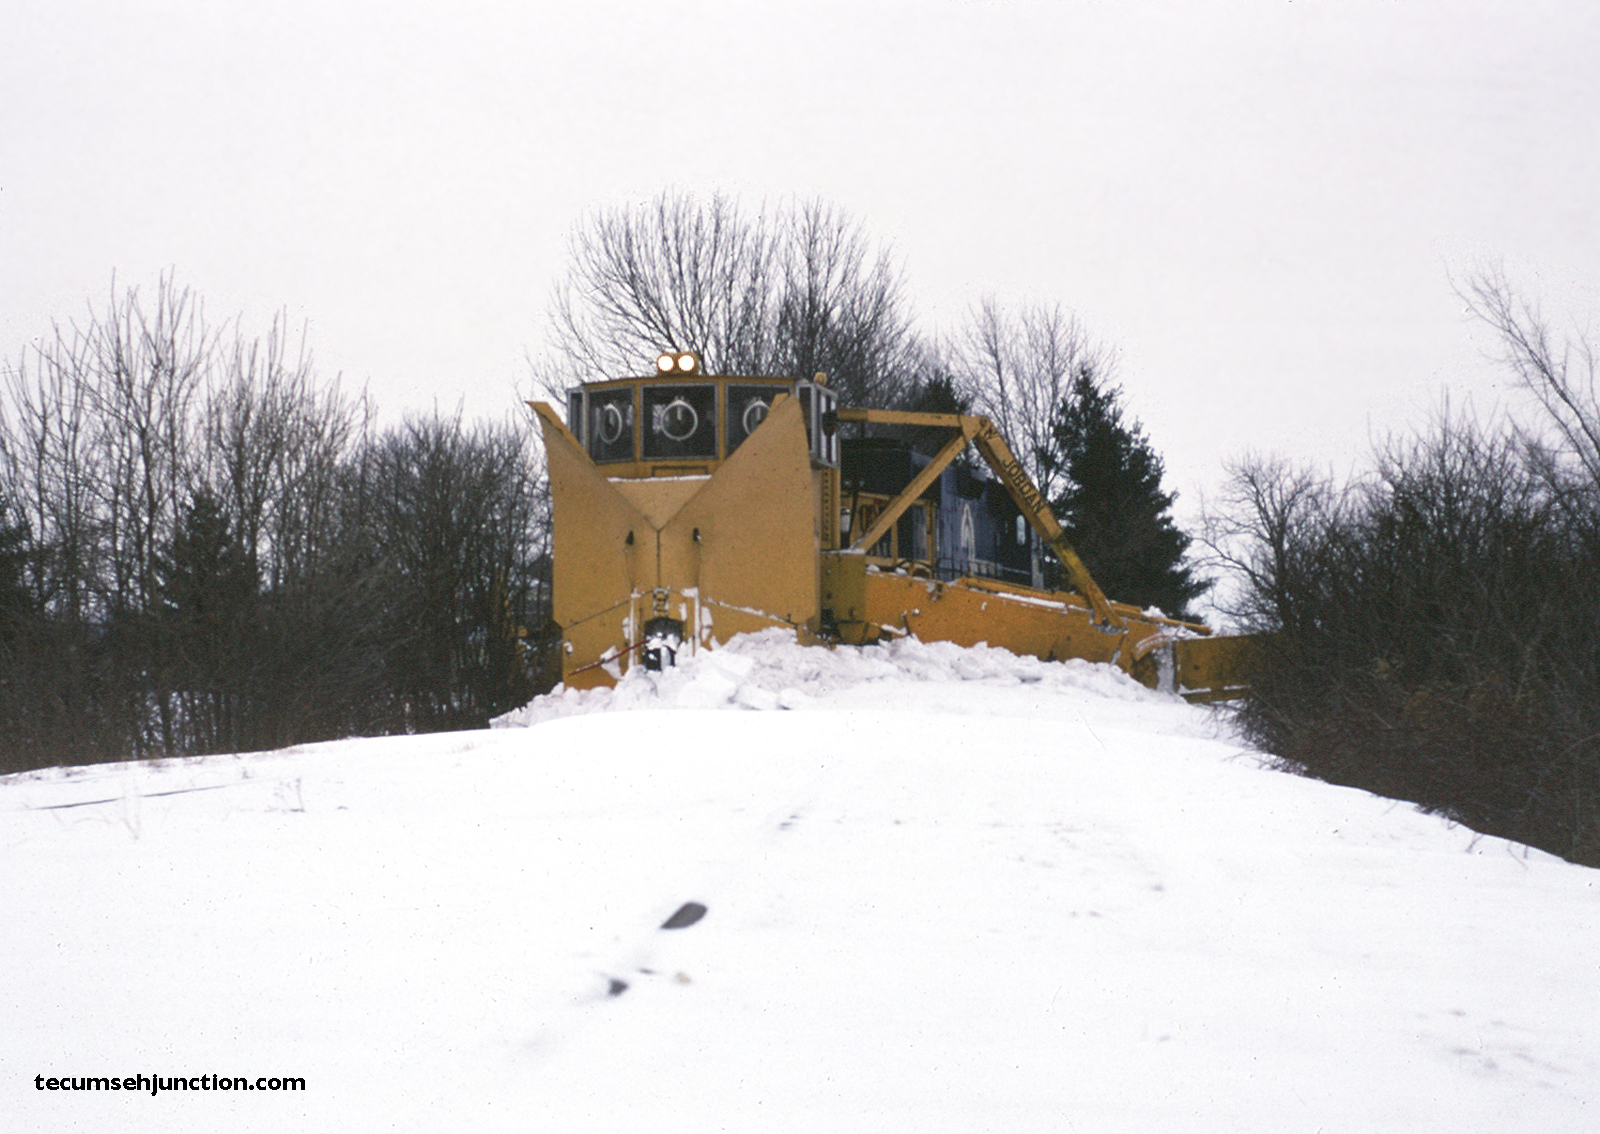 Before departing for Toledo, the spreader plowed snow on the east and south legs of the Lenawee Junction wye.